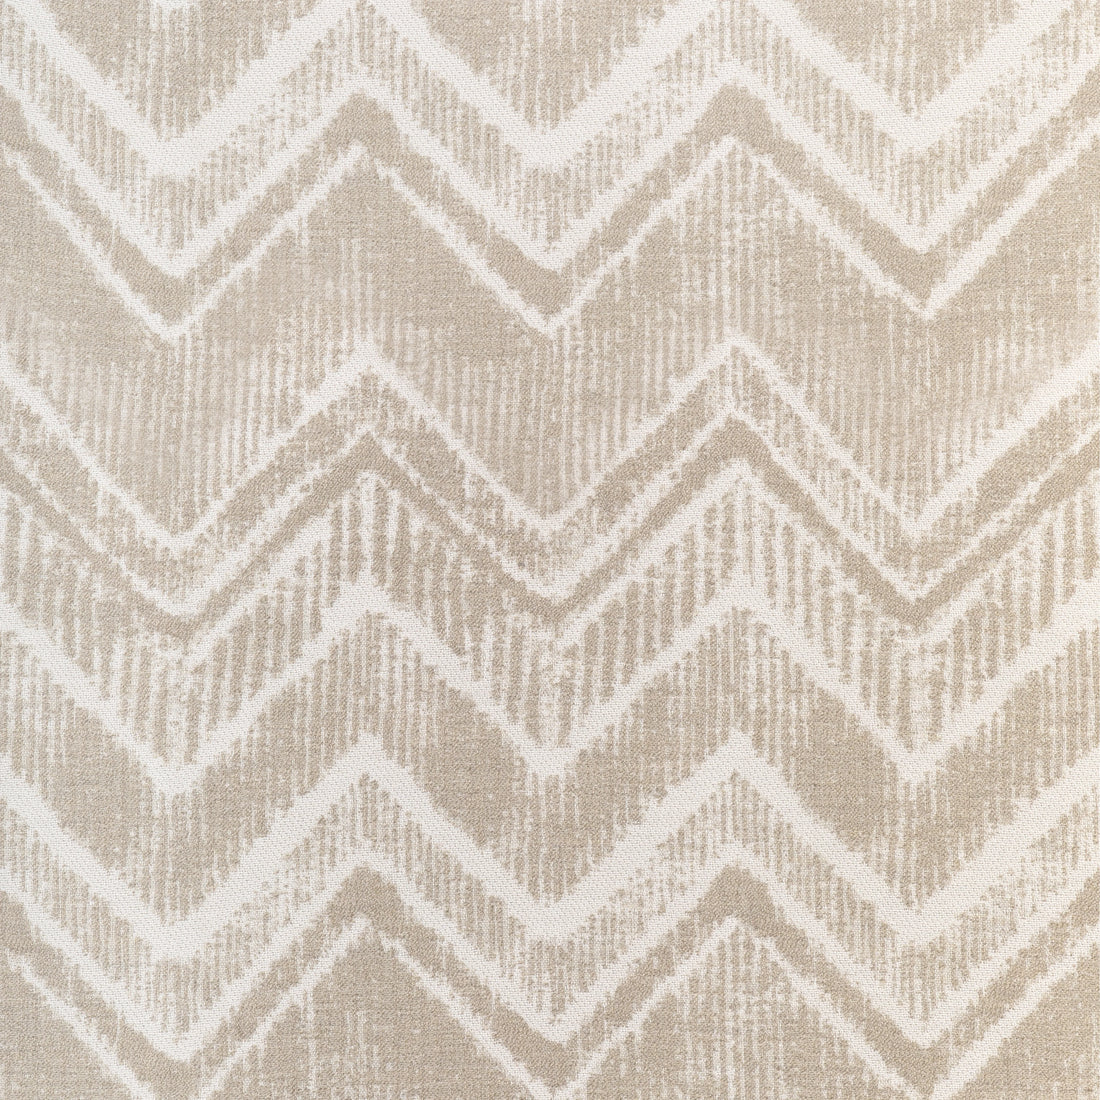 Riviera Batik fabric in sand color - pattern 36934.16.0 - by Kravet Couture in the Riviera collection